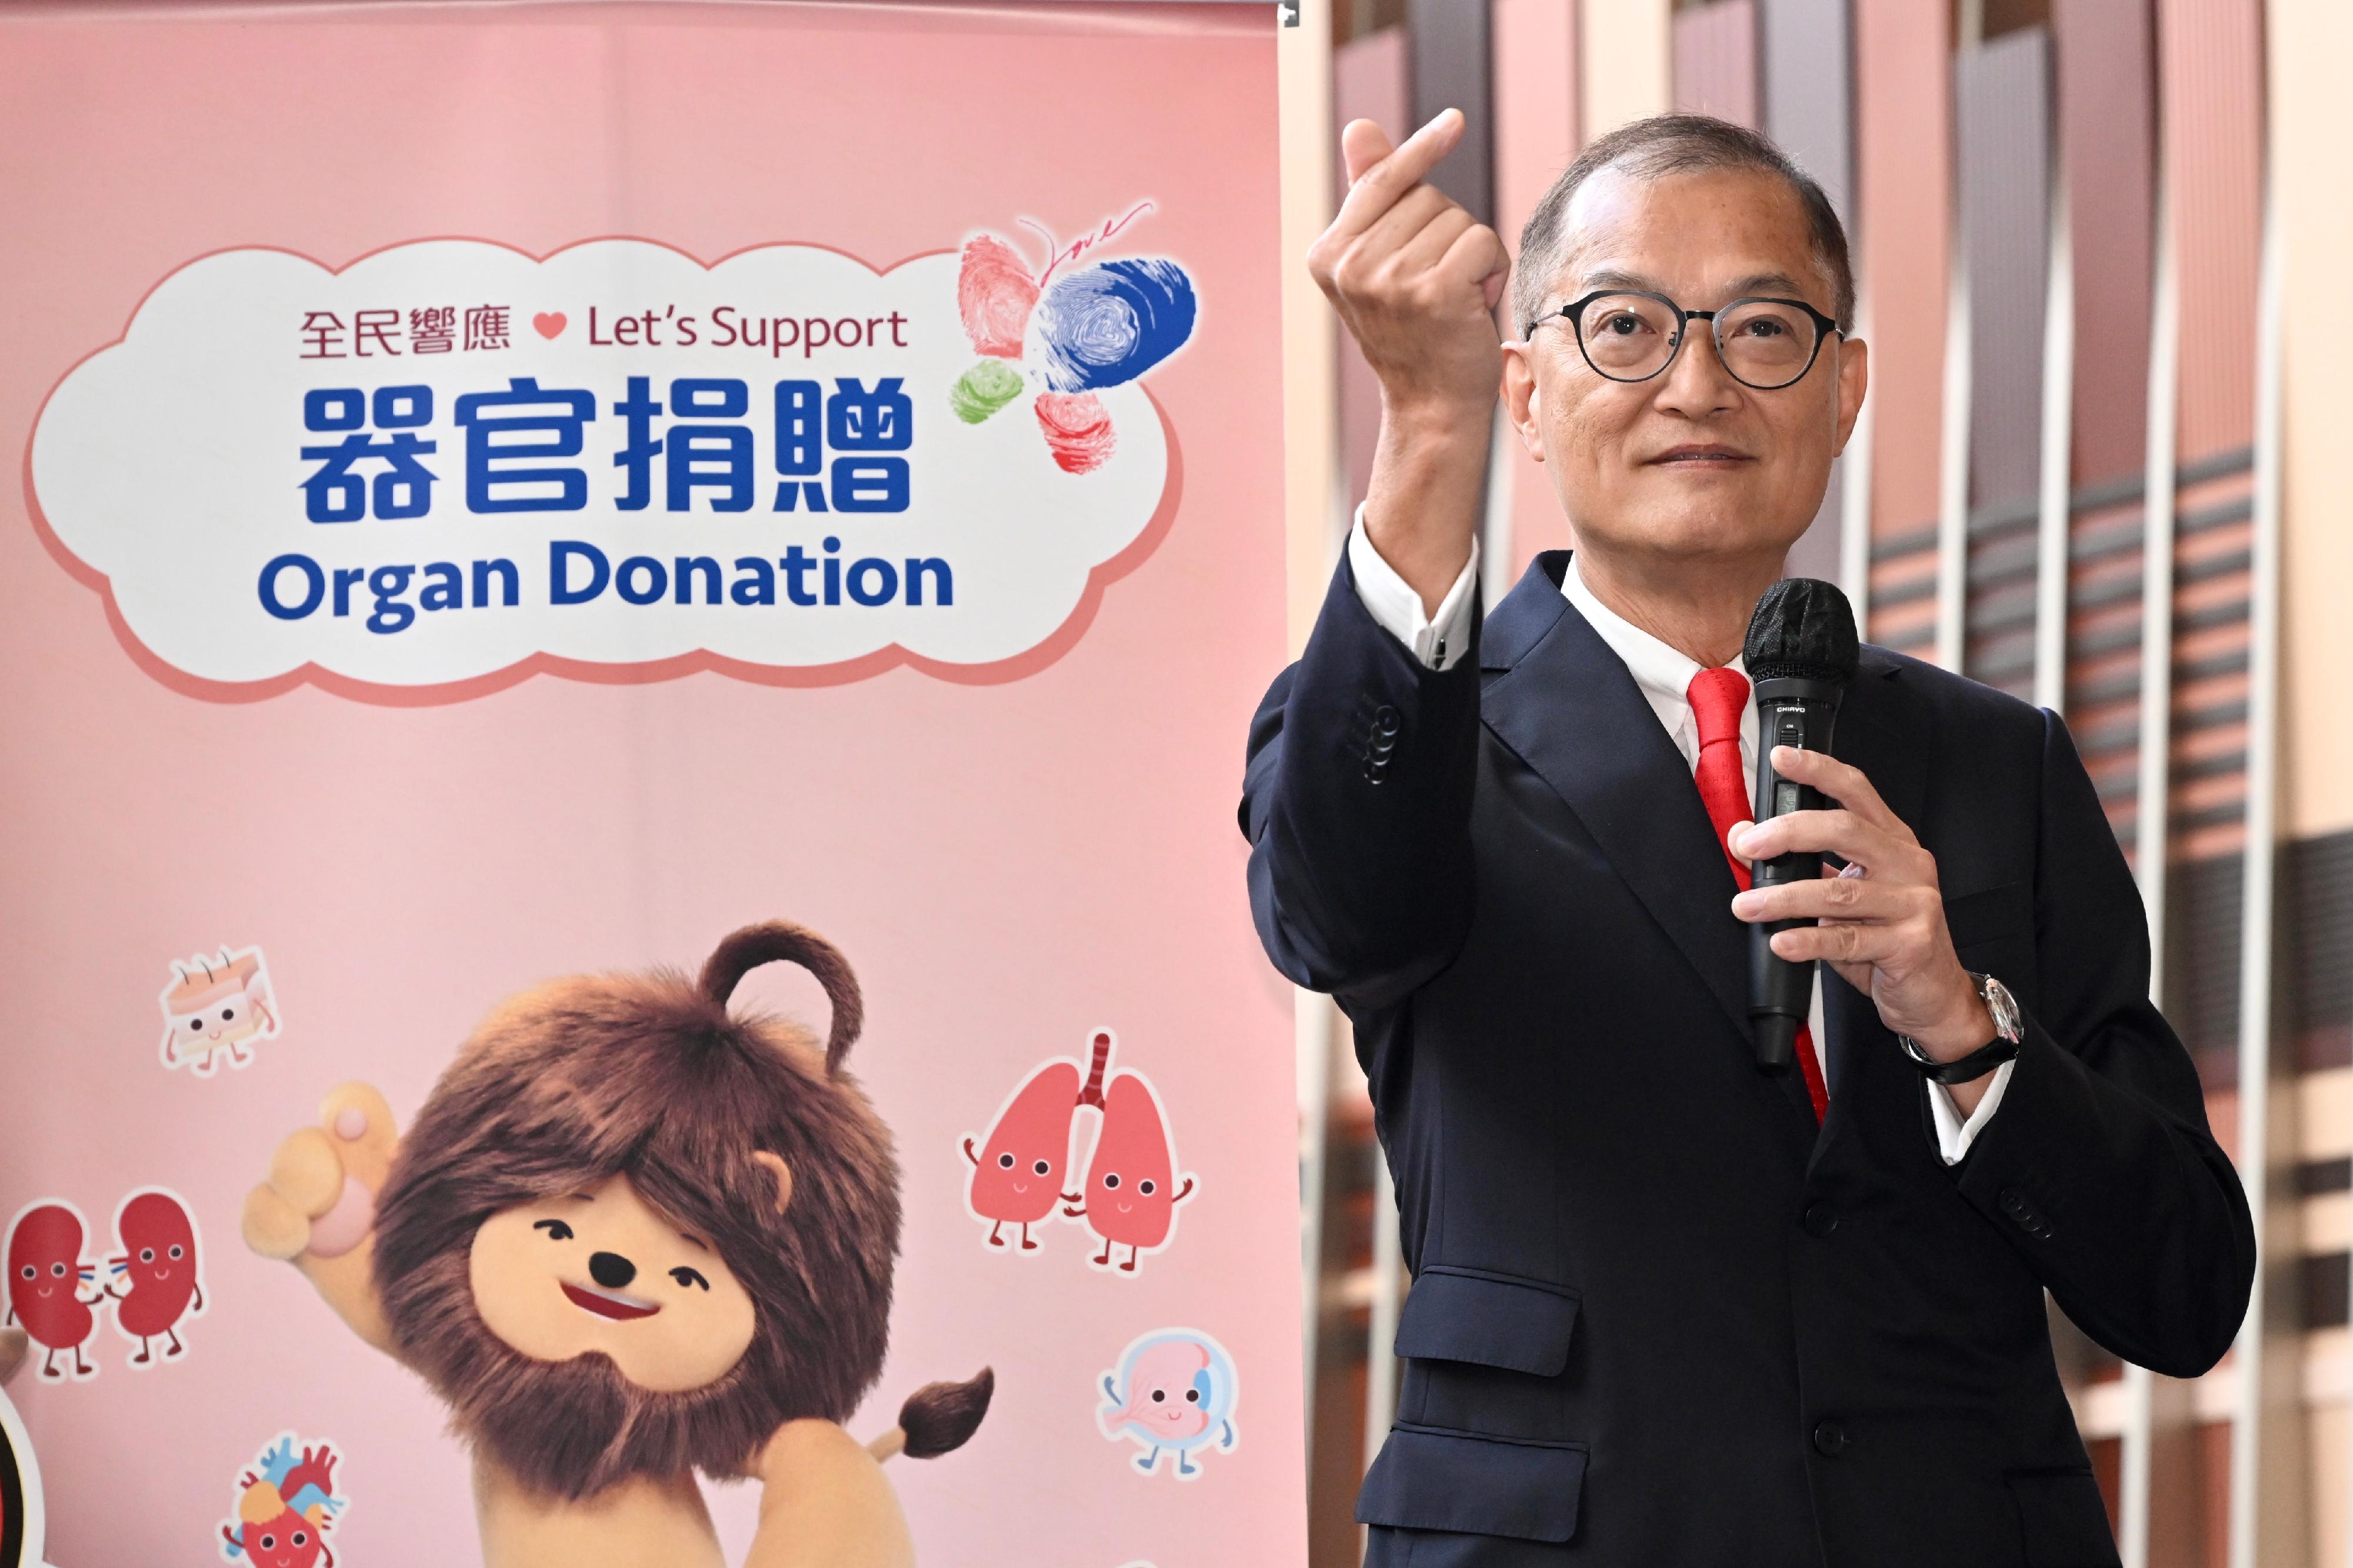 While attending an organ donation promotion event at the Legislative Council Complex today (June 7), the Secretary for Health, Professor Lo Chung-mau, uses a "little heart" hand gesture to remind the public of the successful case in which a 4-month-old baby girl managed to survive upon receiving a heart donation. He called for continued support from the public for organ donations.